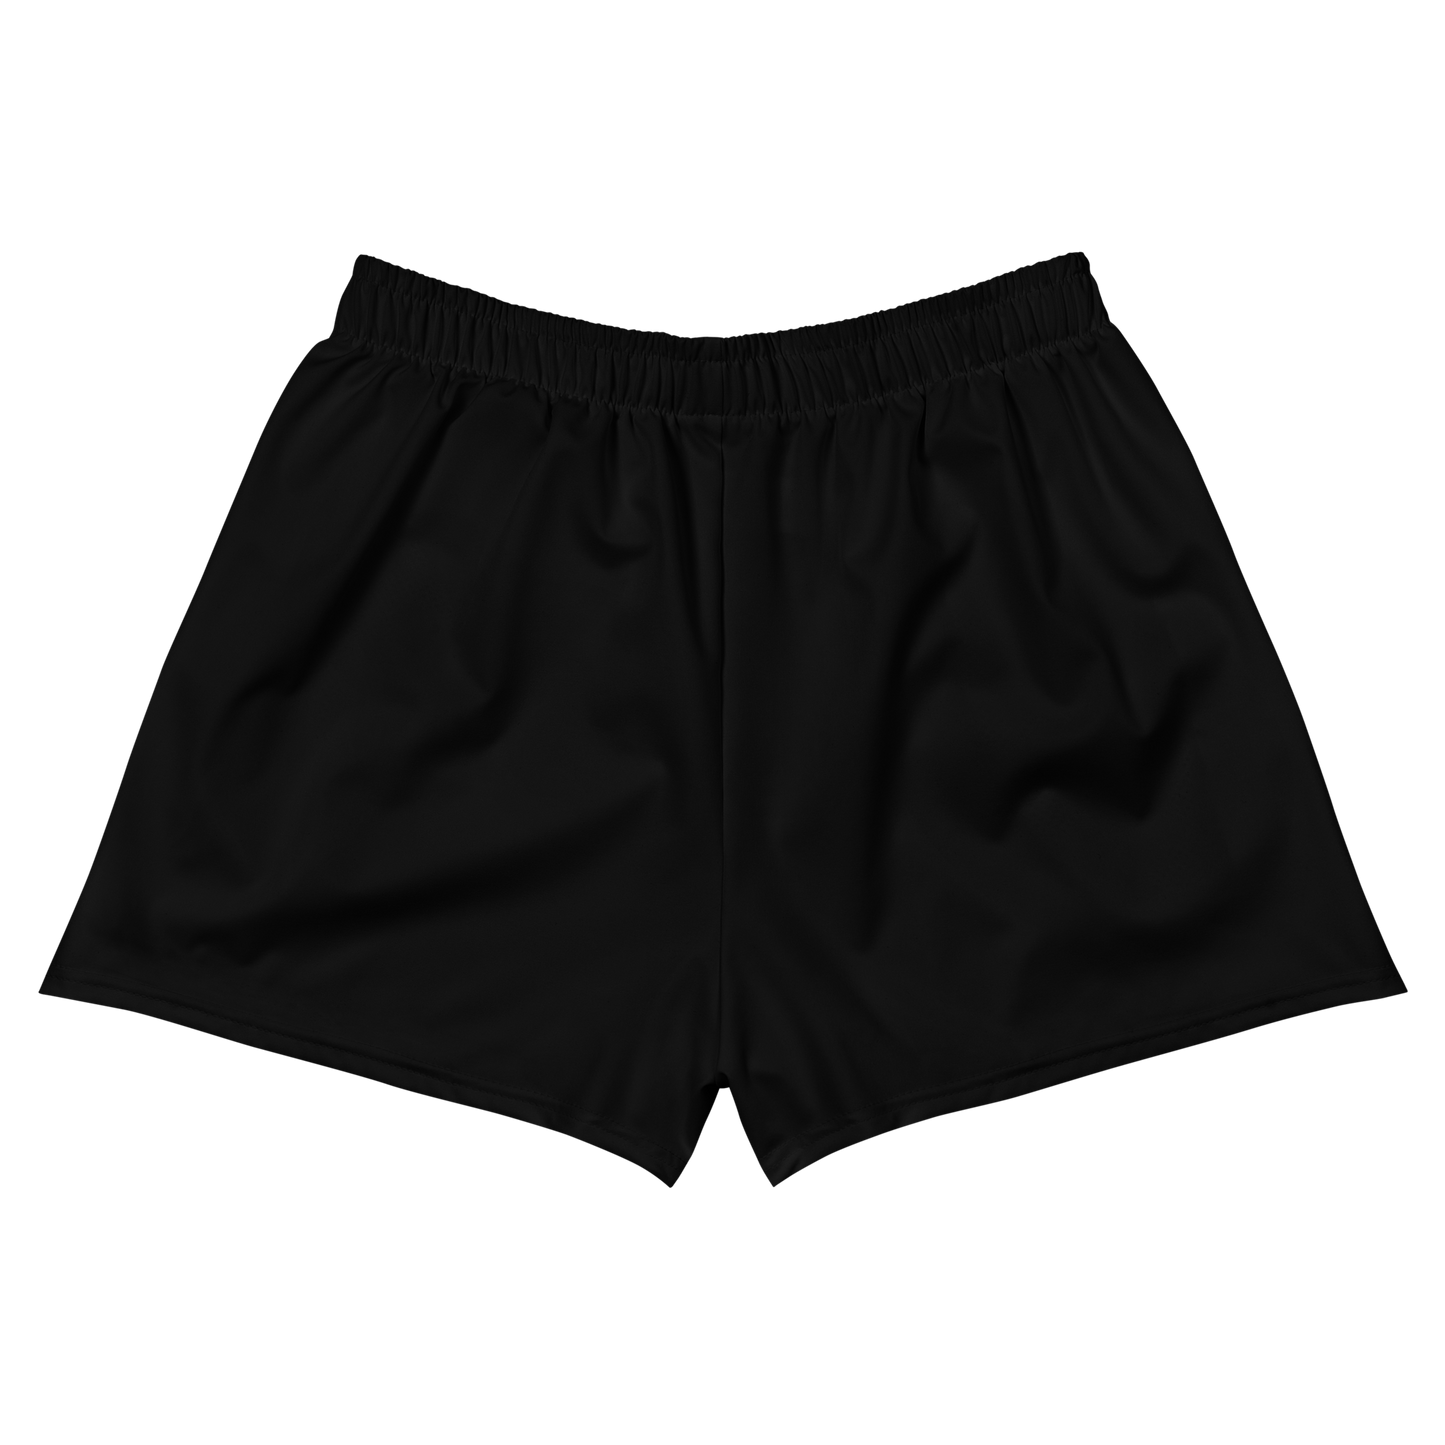 THE BRAND WOMANS SHORTS